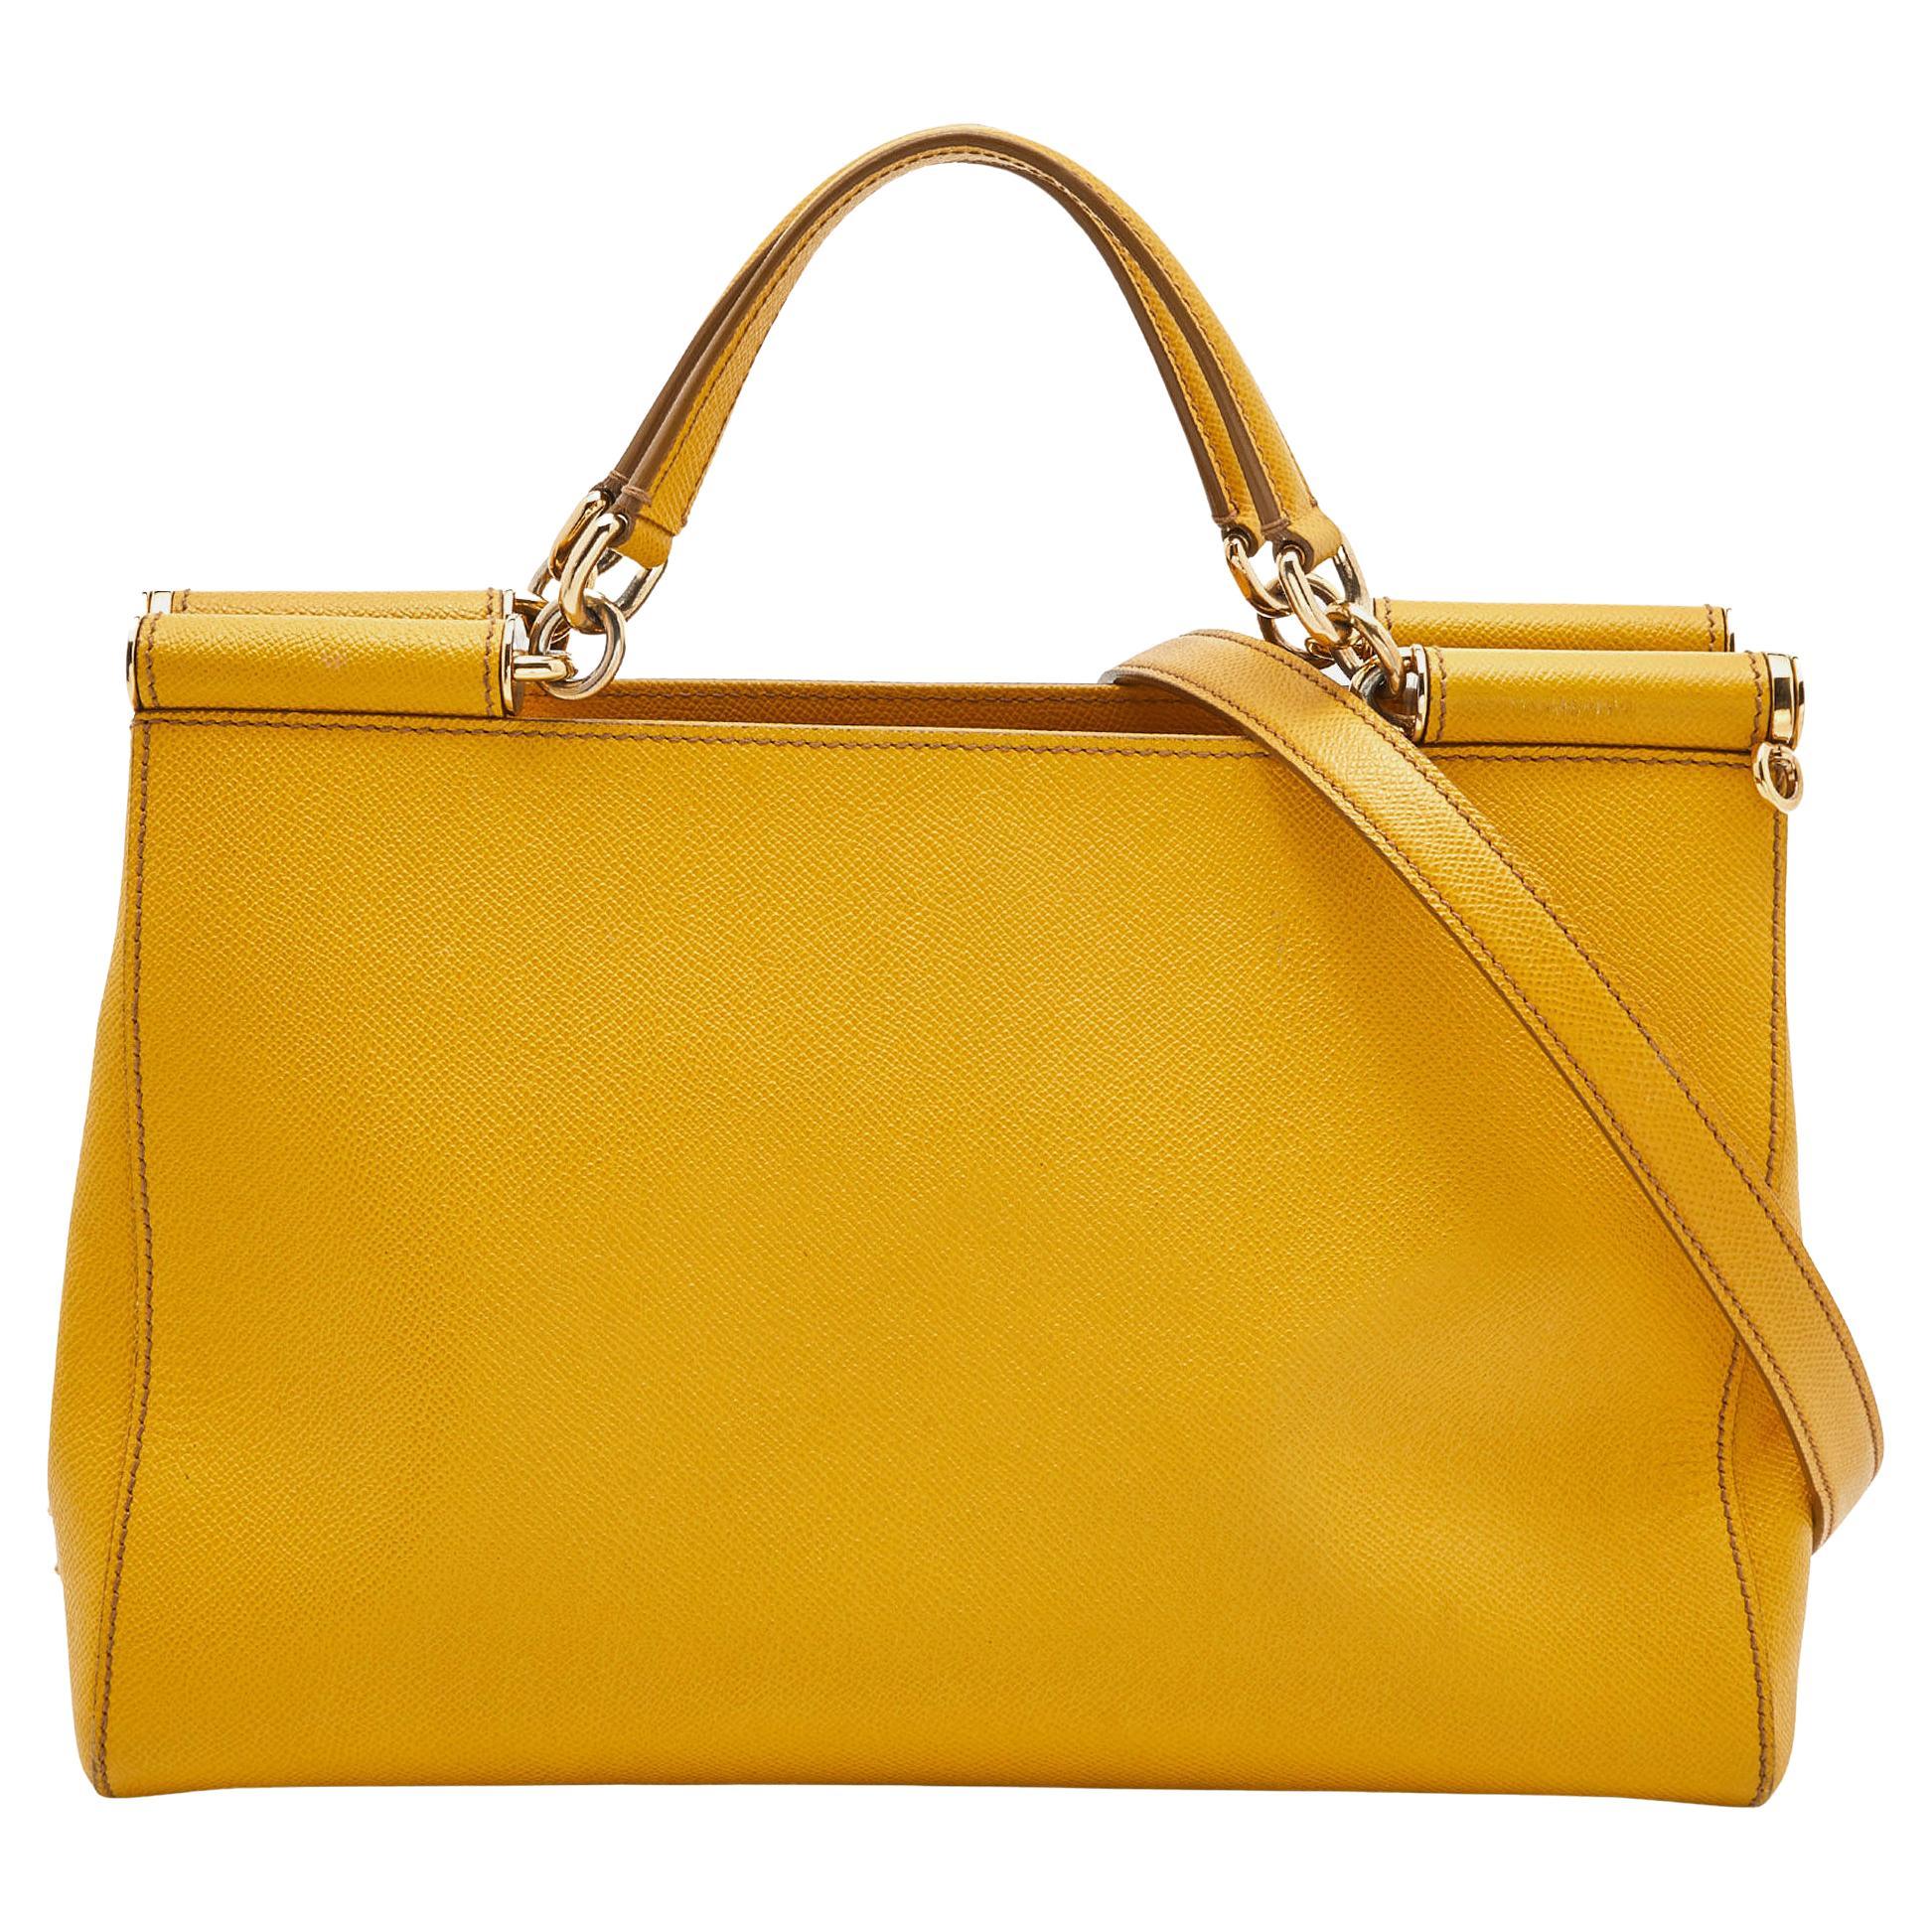 Dolce & Gabbana Yellow Leather Miss Sicily Shopper Tote